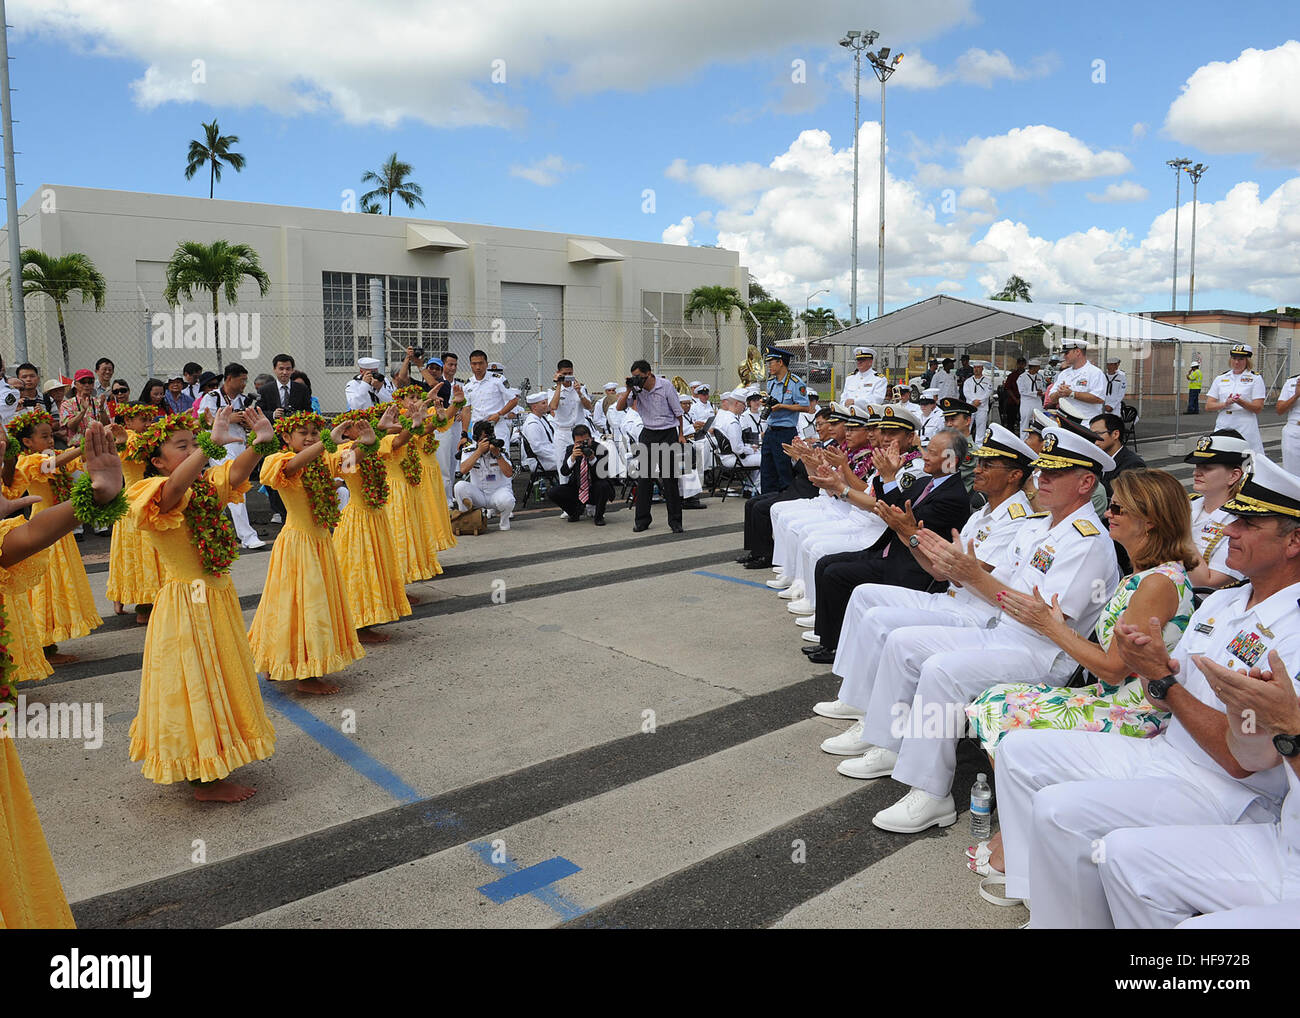 130906-N-ZK021-010 – PEARL HARBOR-HICKAM (Sept. 6, 2013) – U.S. and Chinese leaders watch as Keiki Hula dancers perform during an arrival ceremony for three People’s Liberation Army-Navy ships, Luhu-class destroyer Qingdao (DDG 113), Jiangkai-class frigate Linyi (FFG 547) and a Fuqing-class fleet oiler as they arrive in Hawaii for a scheduled port visit. Over the weekend, Chinese and U.S. leaders will conduct dialogues to build confidence and mutual understanding between the two nations. The port visit is part of the U.S. Navy’s ongoing effort to maximize opportunities for developing relations Stock Photo